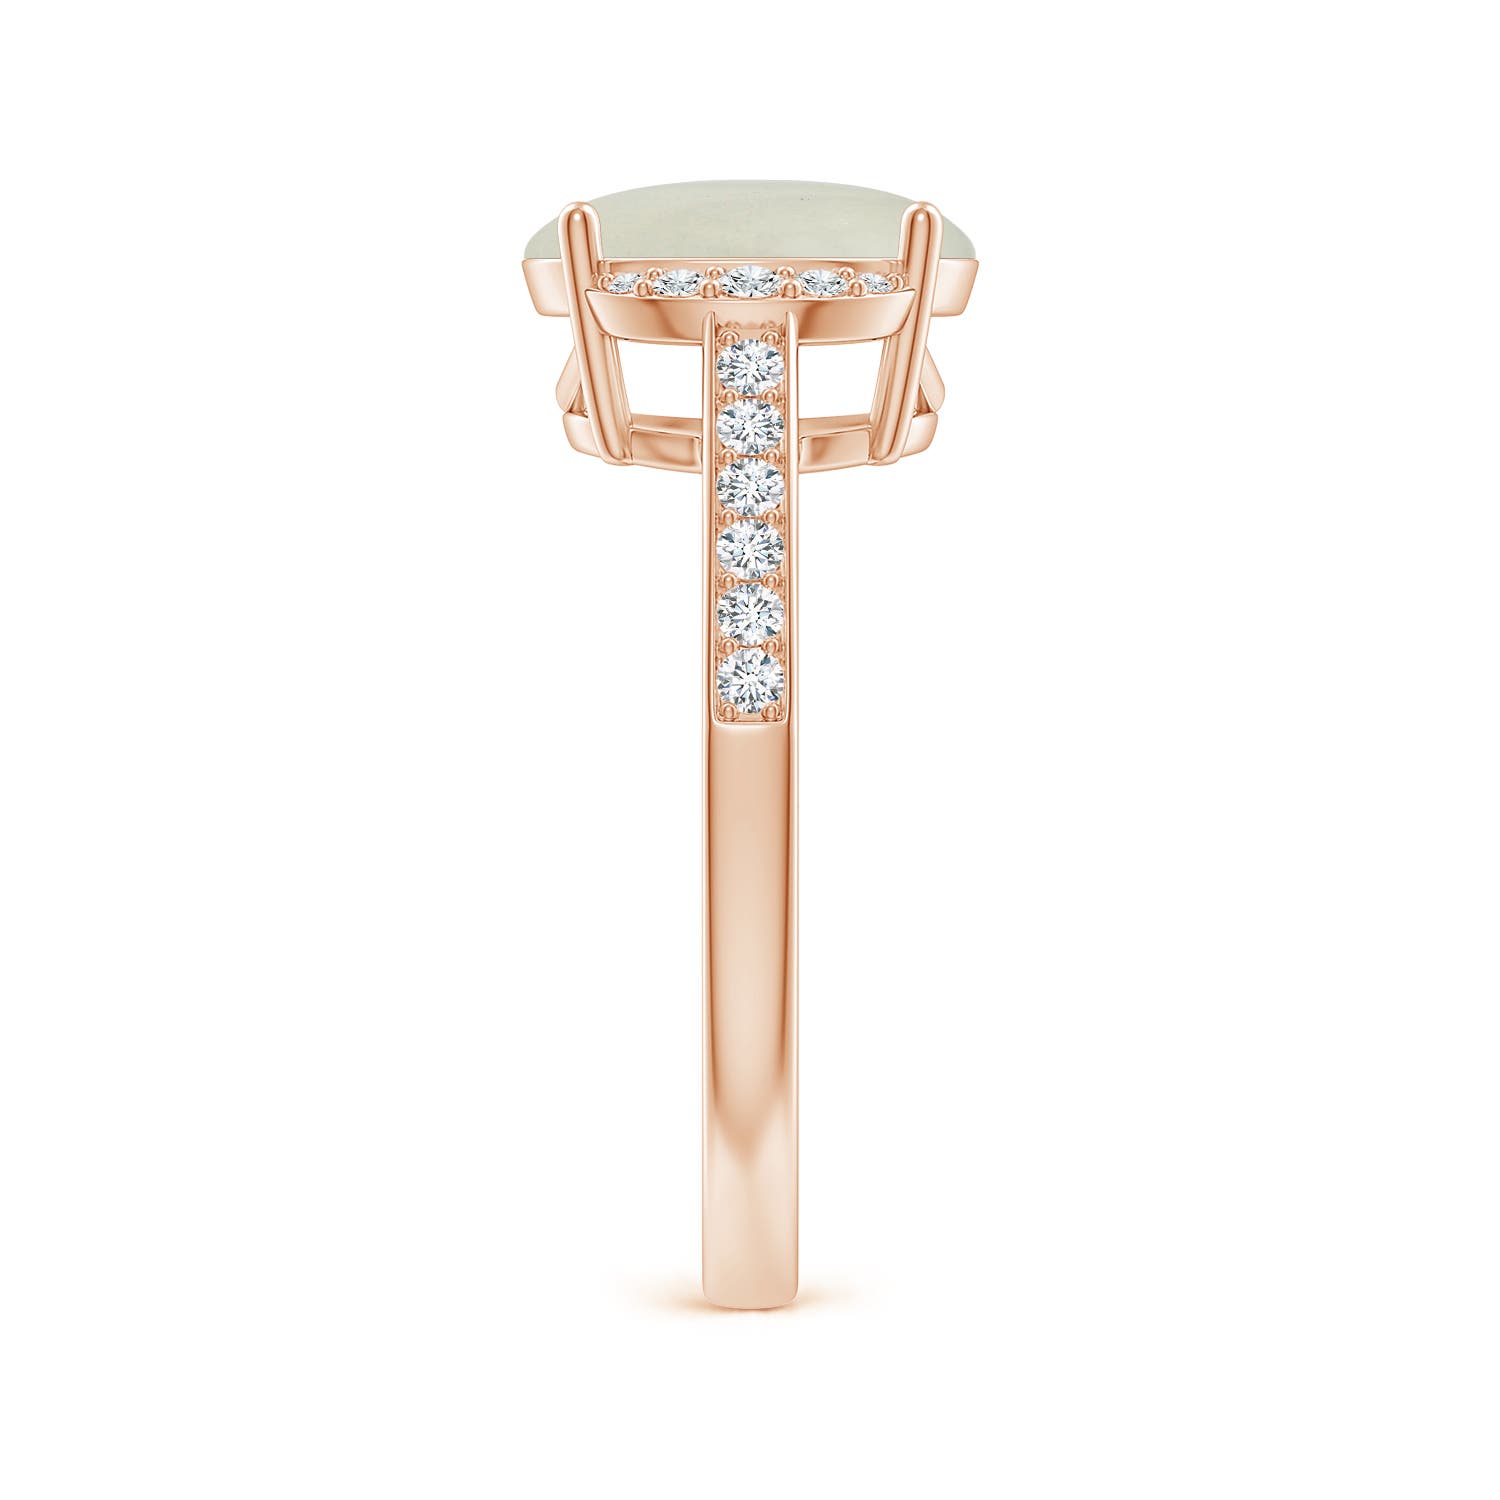 AA - Moonstone / 2.75 CT / 14 KT Rose Gold